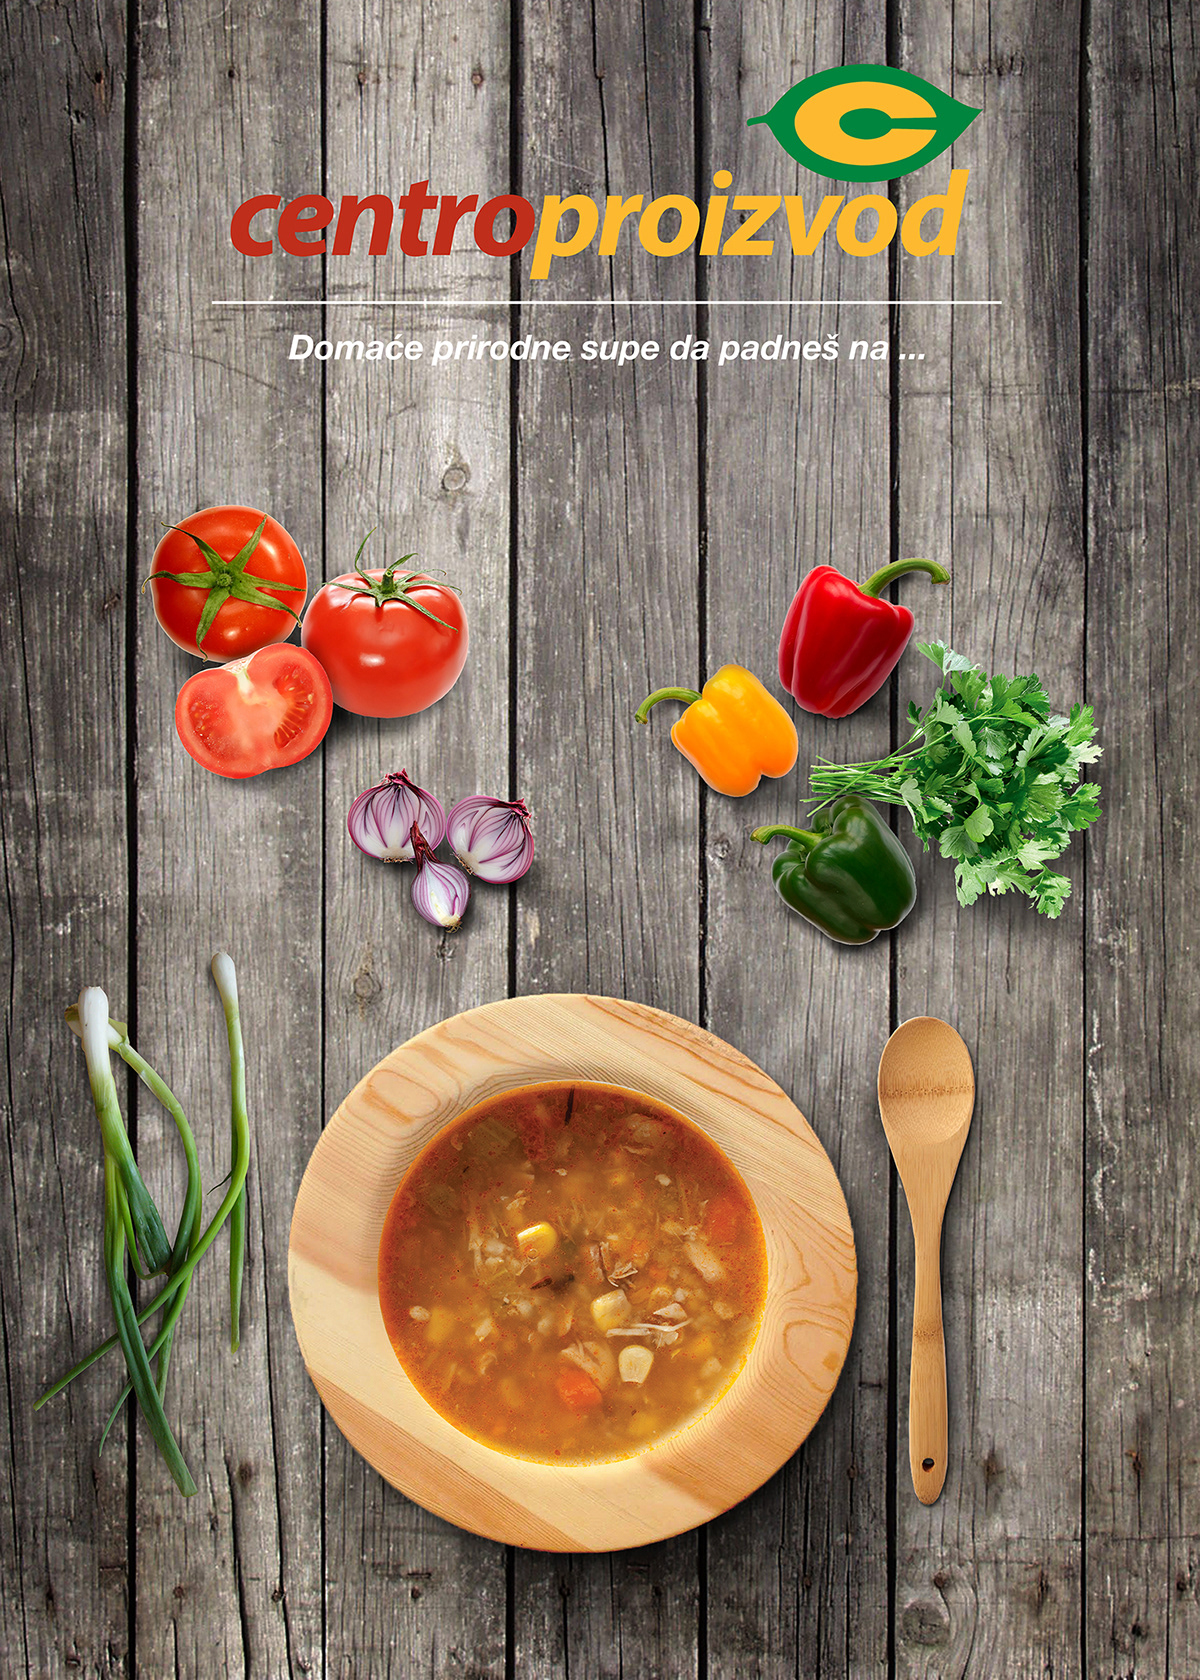 healthy healthy food centro proizvod c supe Soup poster design Poster Design commercial promo poster